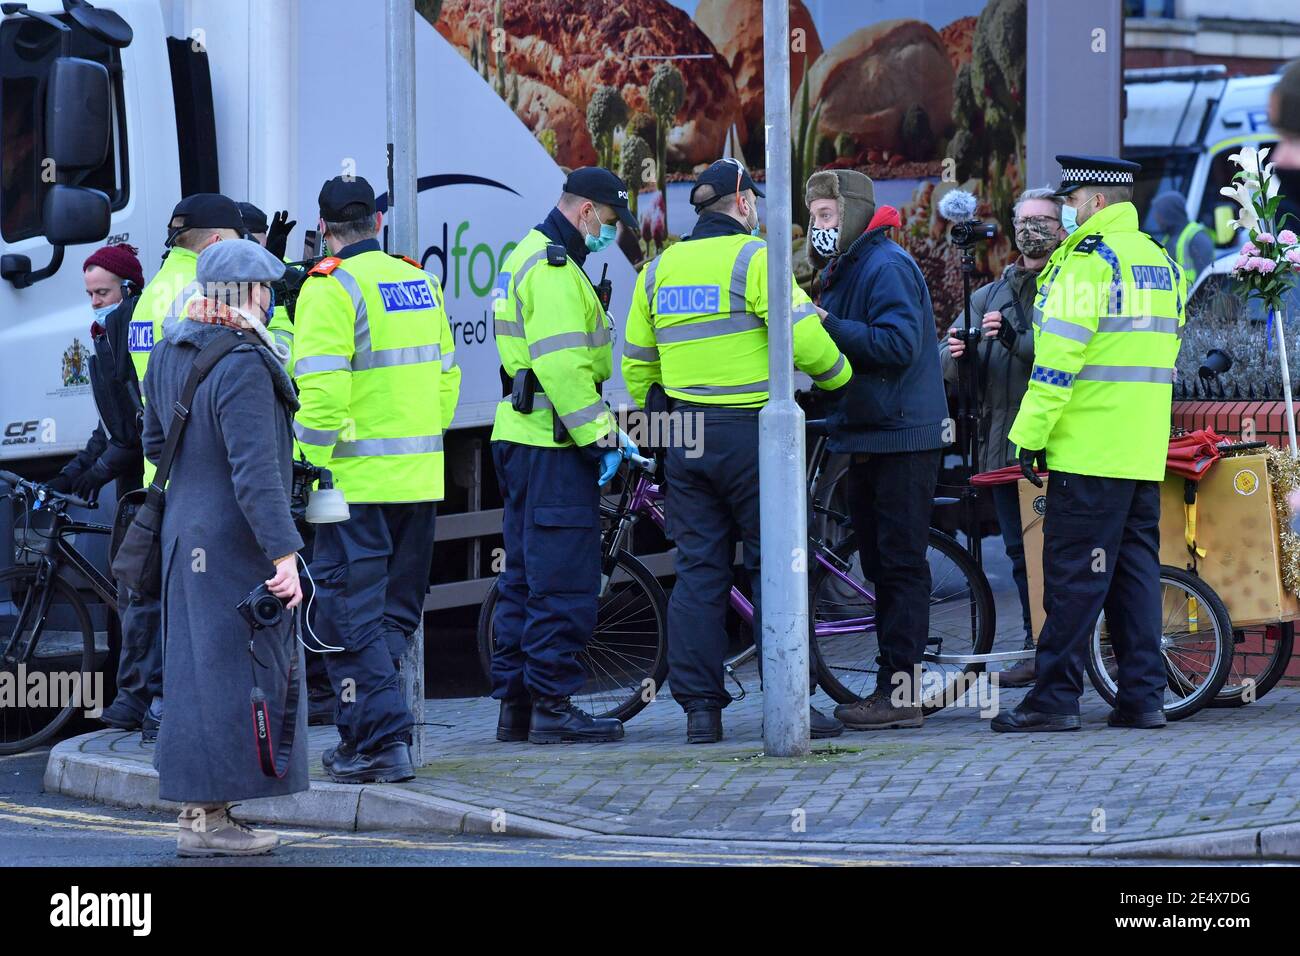 Police detain a cyclist who was playing music outside Bristol Magistrates' Court, where Rhian Graham, Milo Ponsford, Jake Skuse and Sage Willoughby are due to appear charged with criminal damage over the toppling of the Edward Colston statue in Bristol during the Black Lives Matter protests in June last year. Picture date: Monday January 25, 2021. Stock Photo